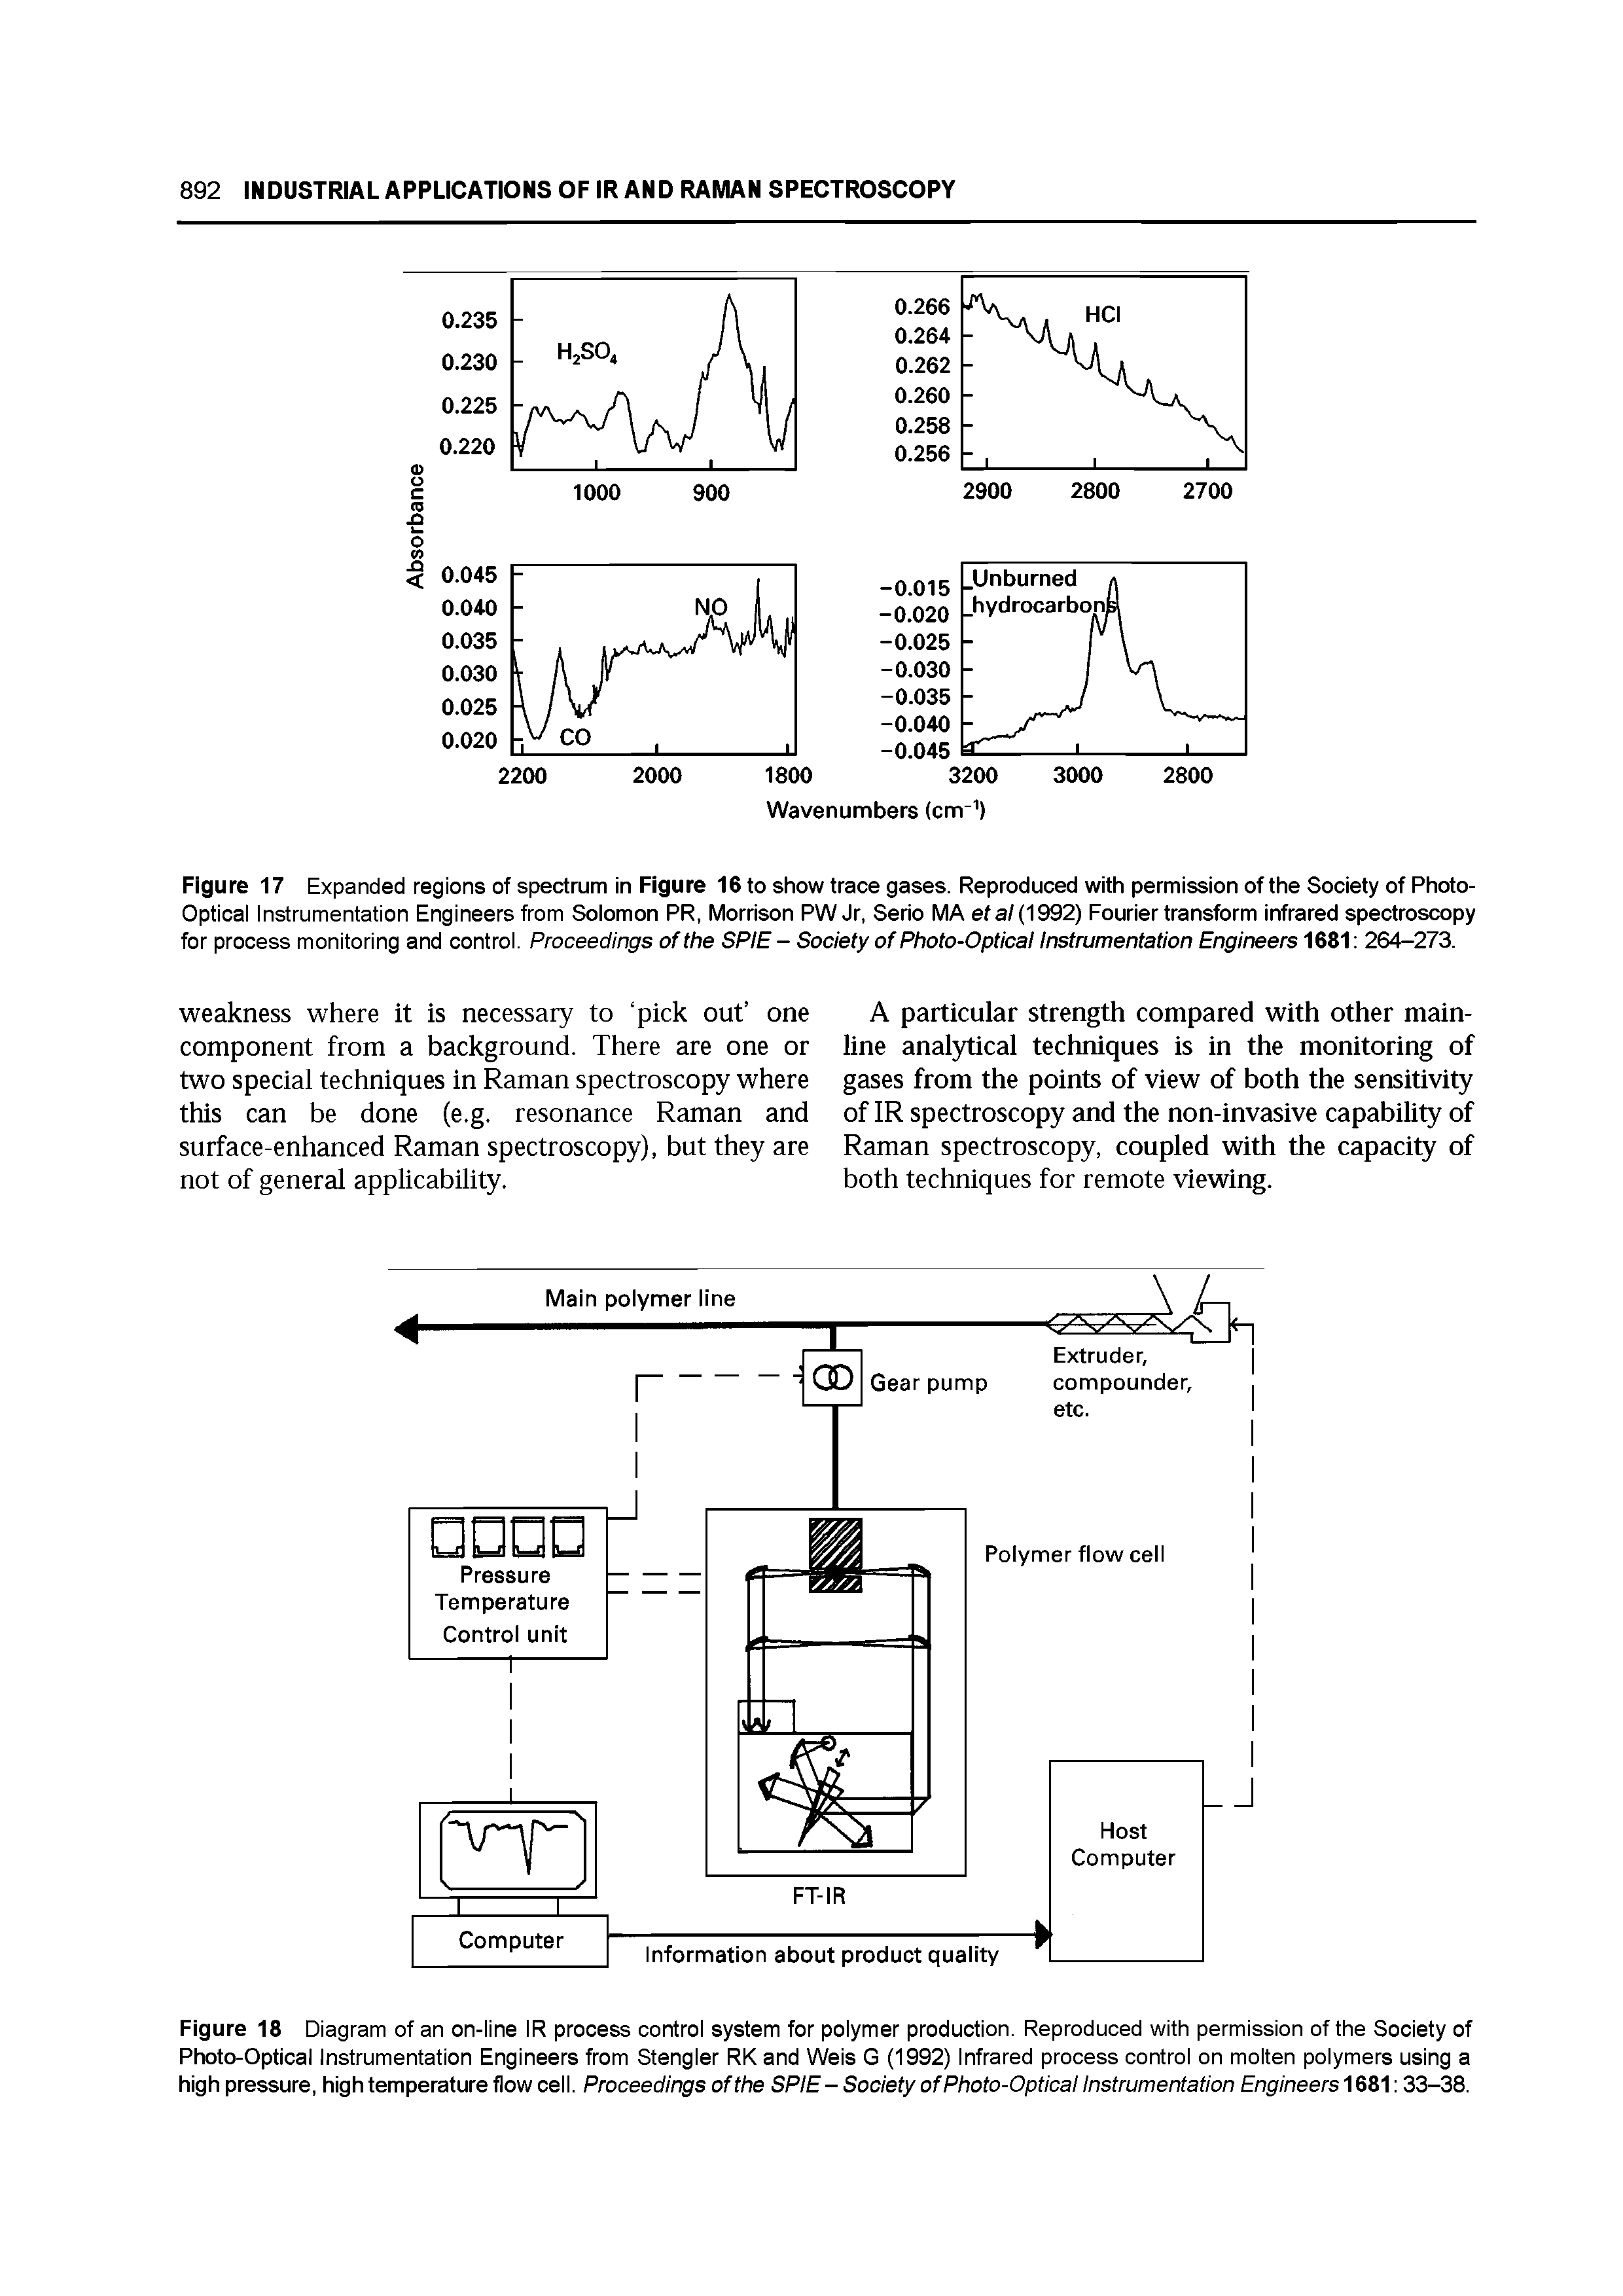 Figure 18 Diagram of an on-line IR process control system for polymer production. Reproduced with permission of the Society of Photo-Optical Instrumentation Engineers from Stengler RK and Weis G (1992) Infrared process control on molten polymers using a high pressure, high temperature flow cell. Proceedings of the SPIE - Society of Photo-Optical Instrumentation Engineers 68 33-38.